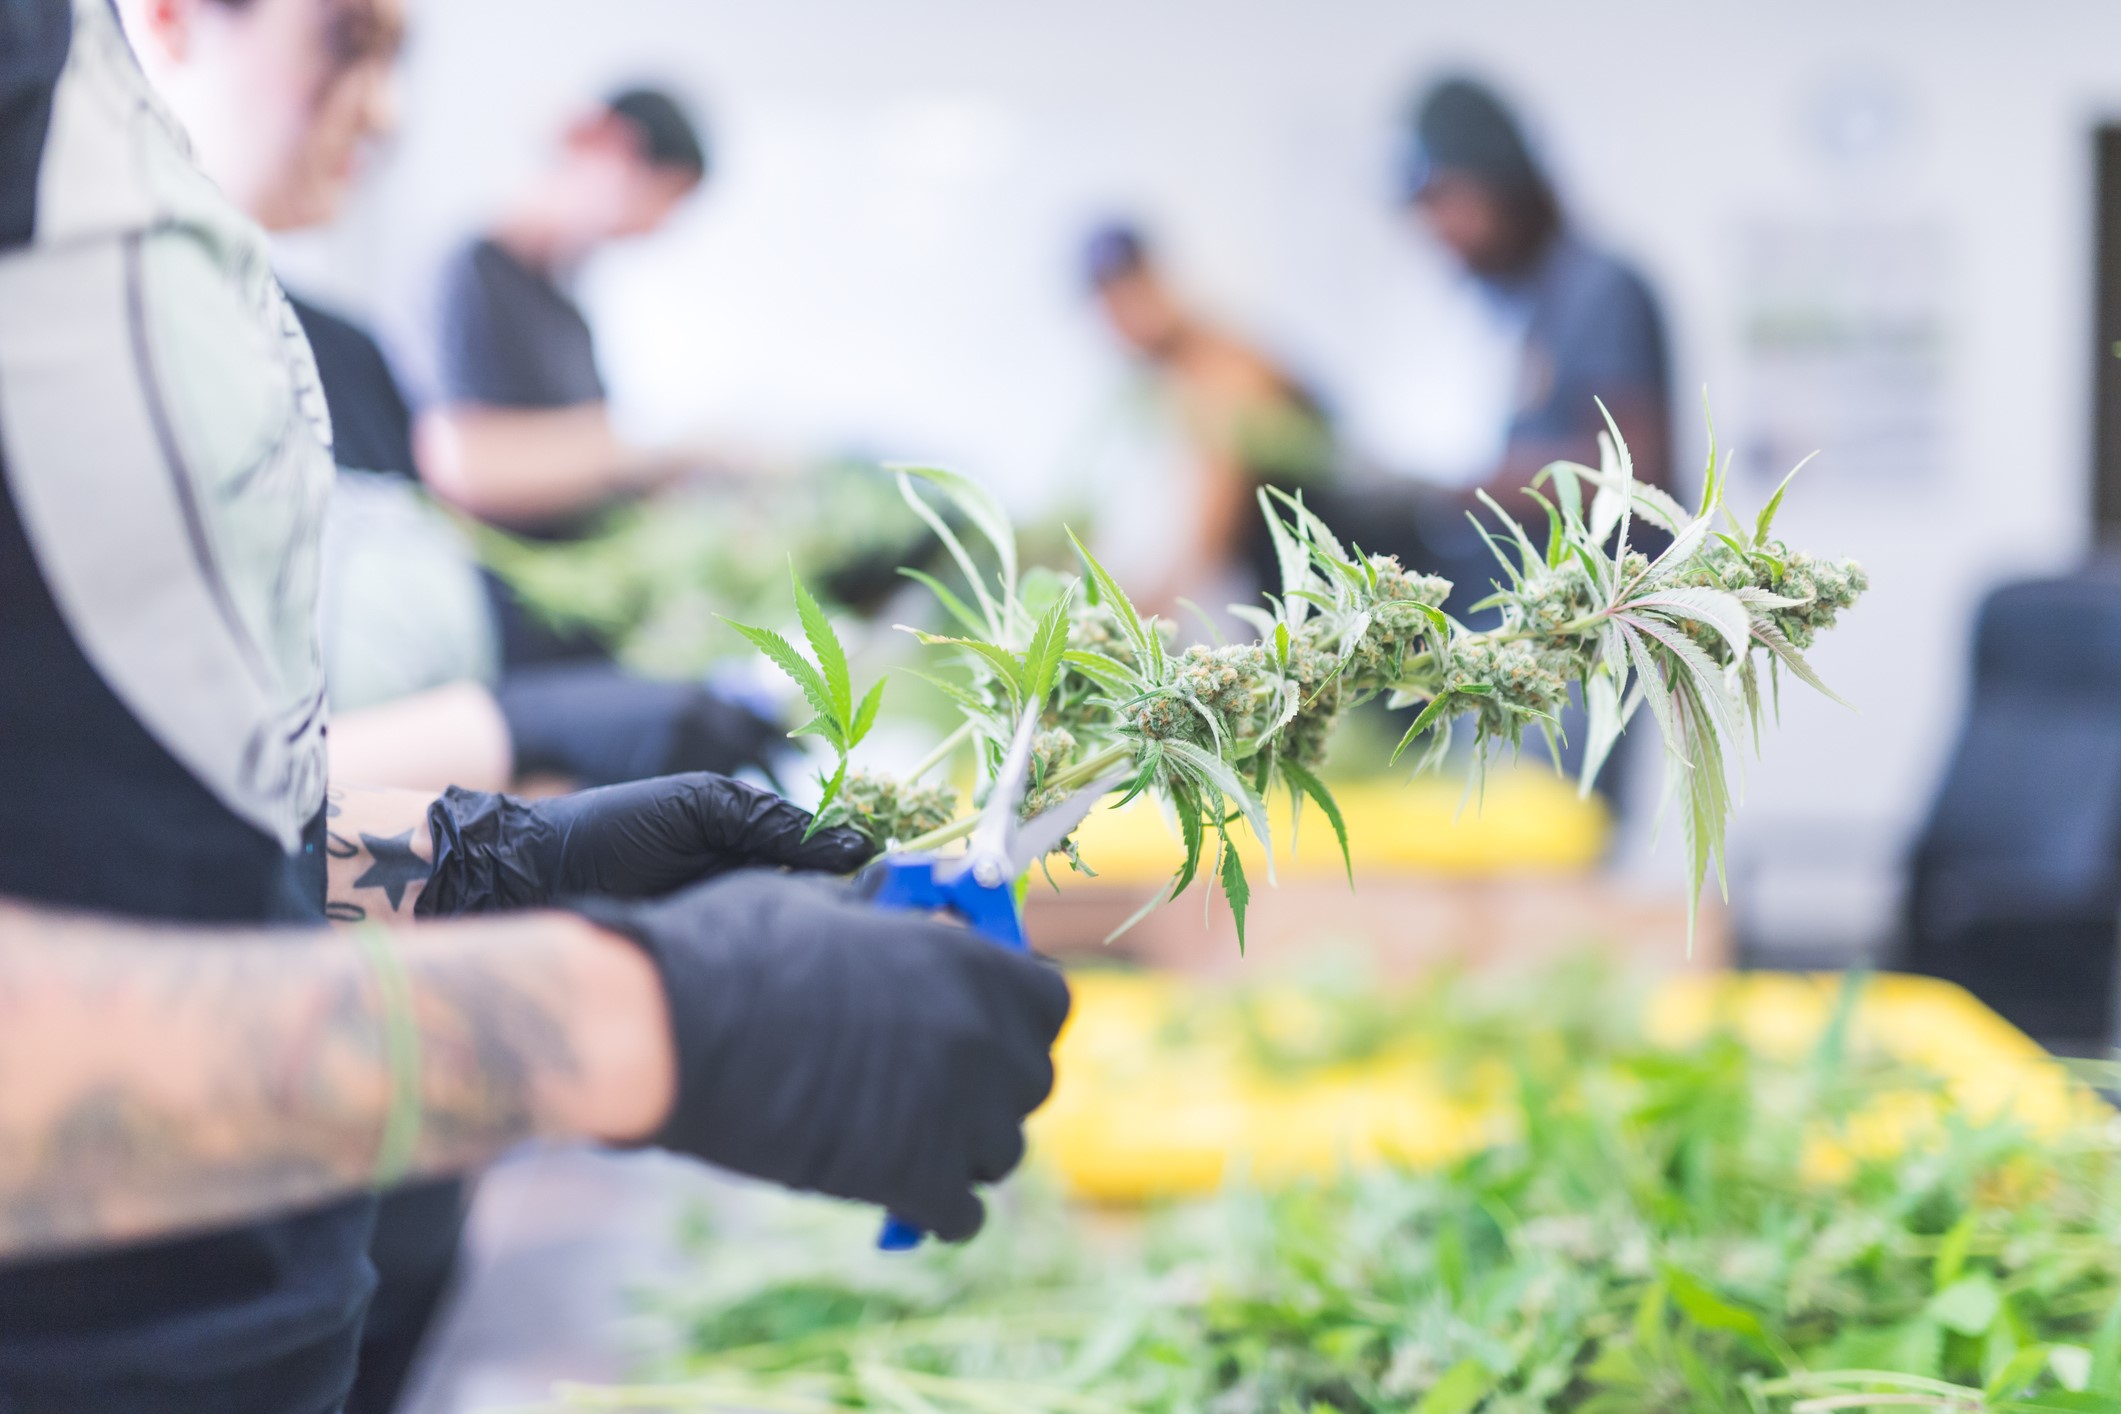 How to Effectively Market Your Cannabis Business